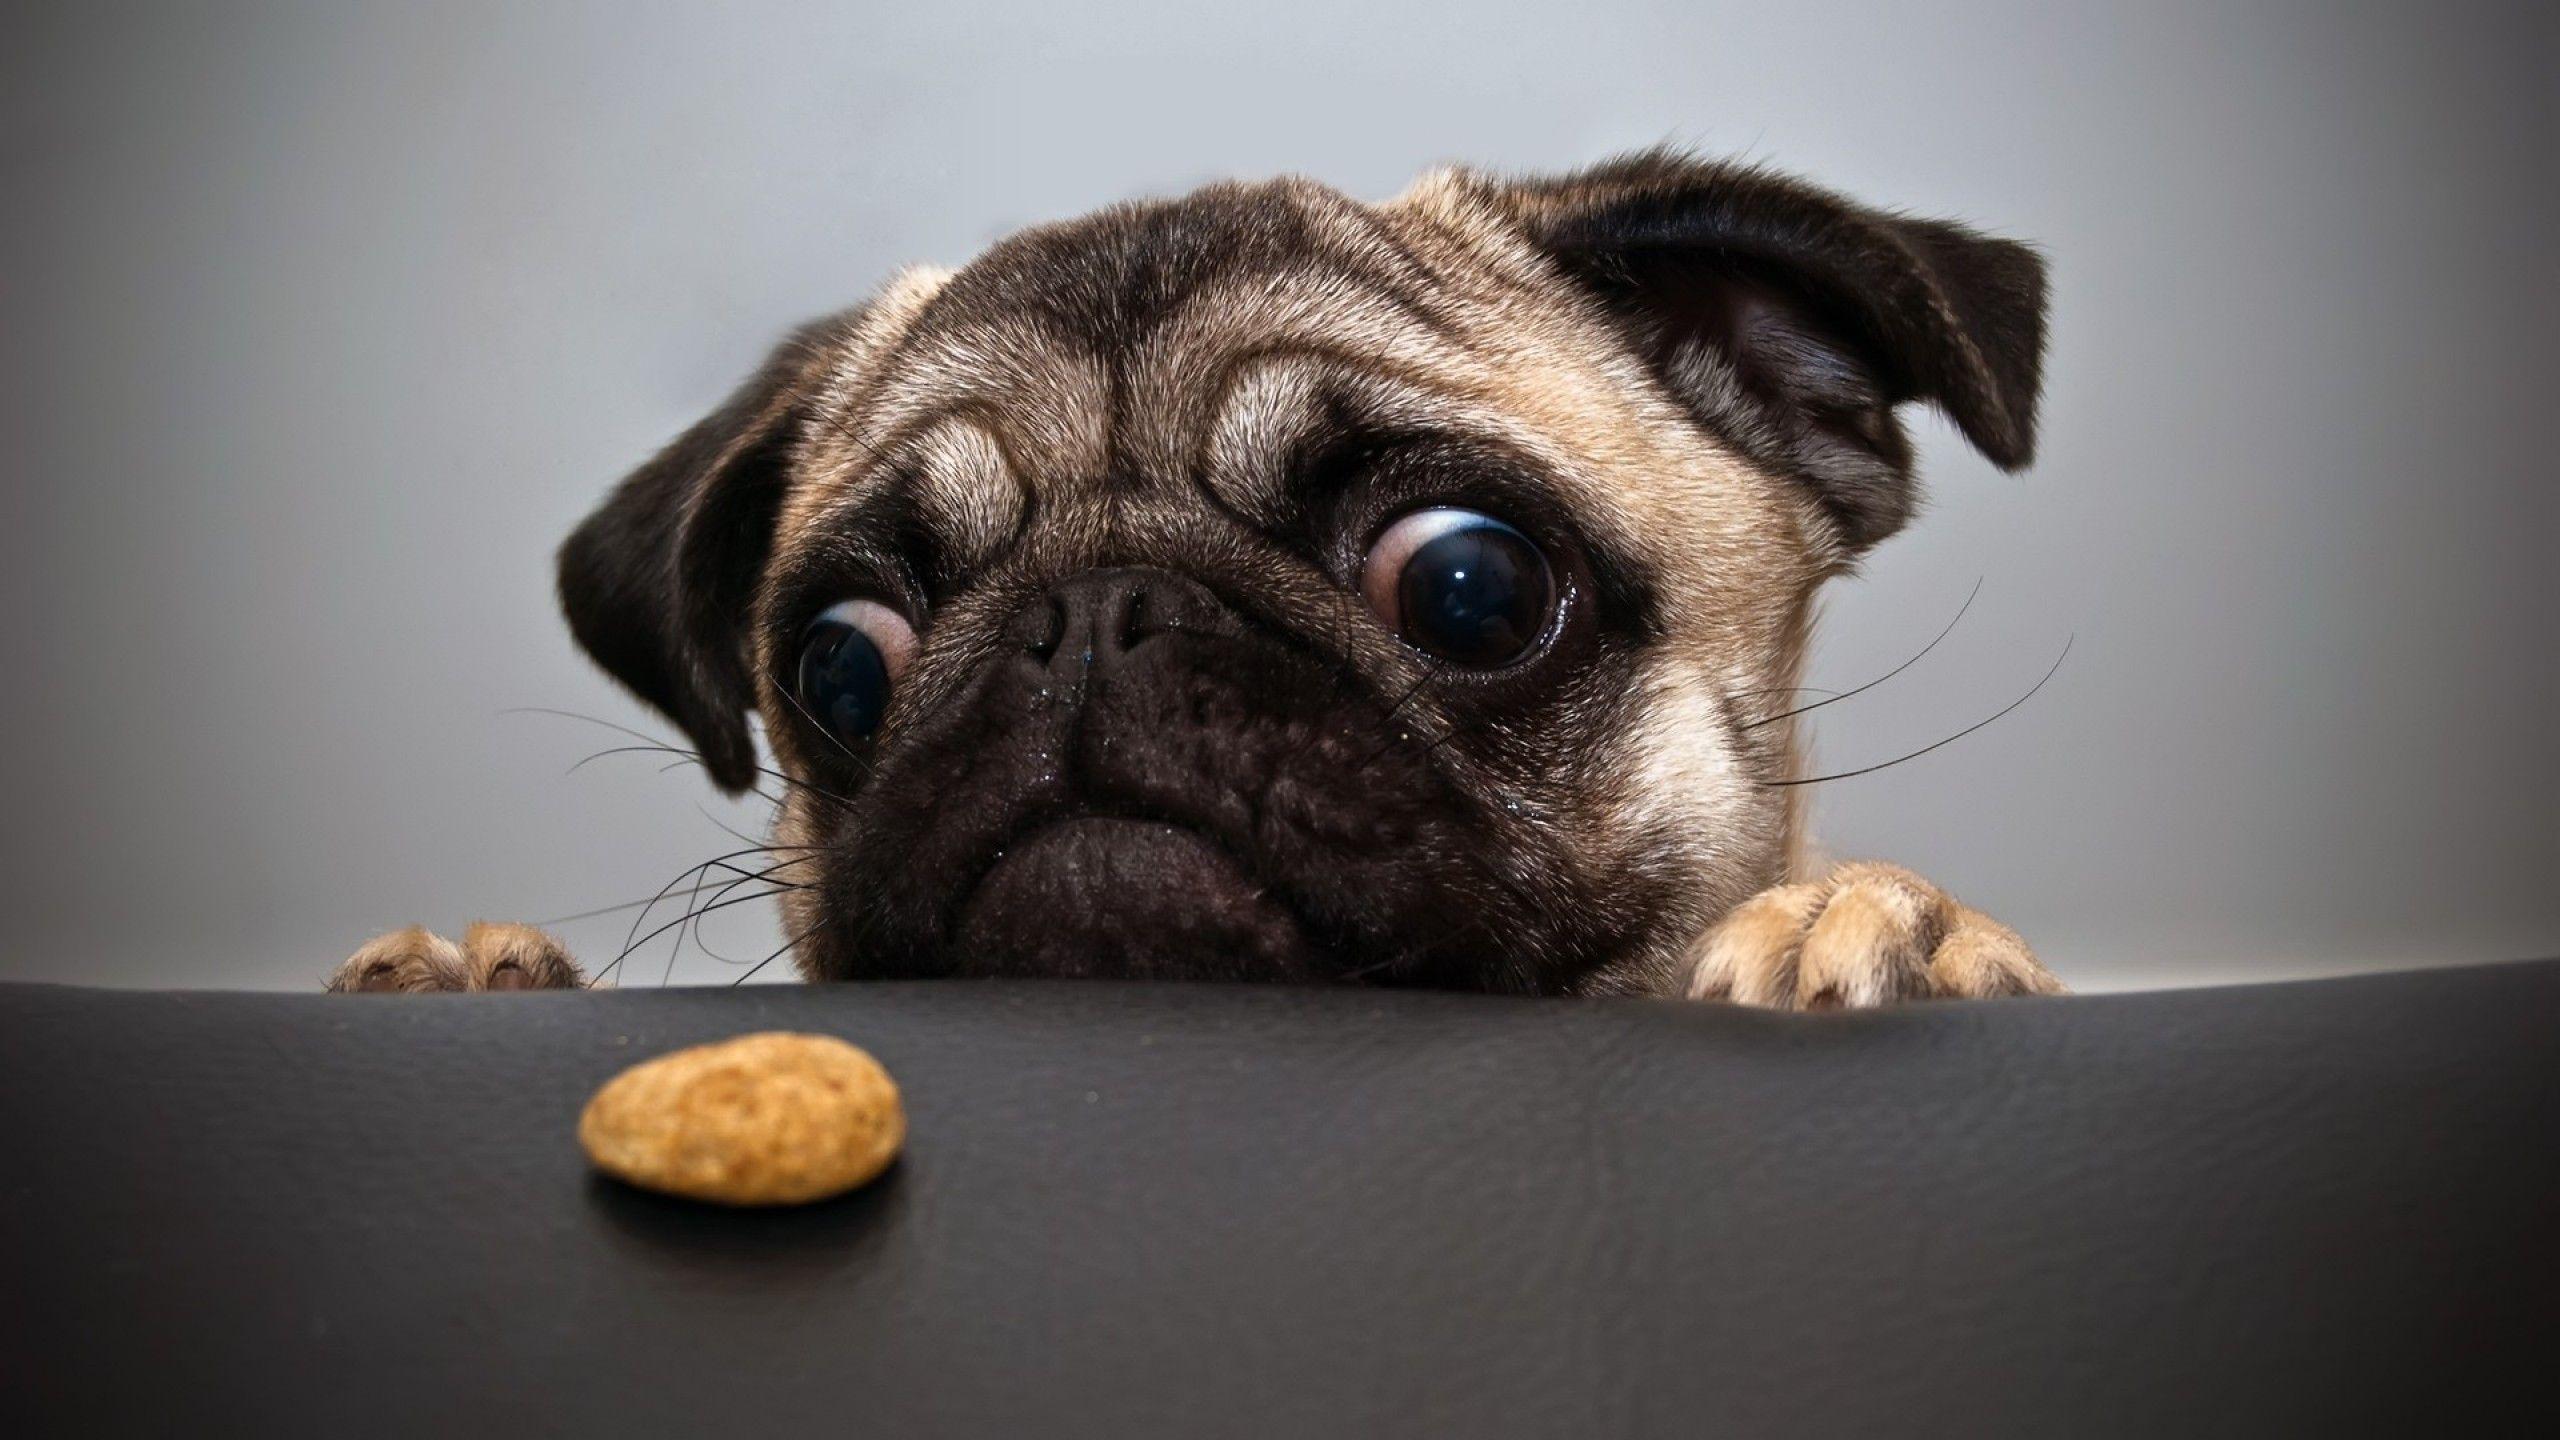 A Pug and a Cookie widescreen wallpaper. Wide